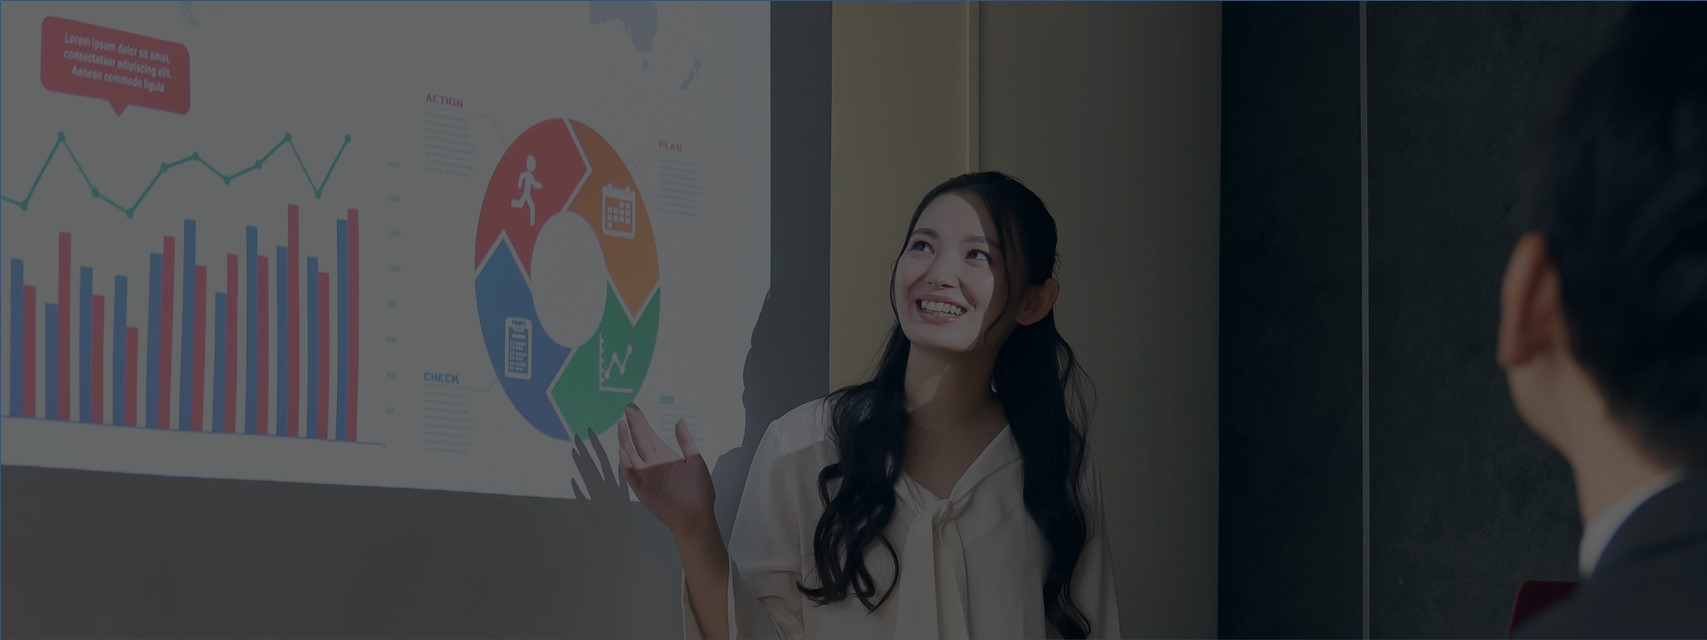 Woman pointing to slide image while presenting.